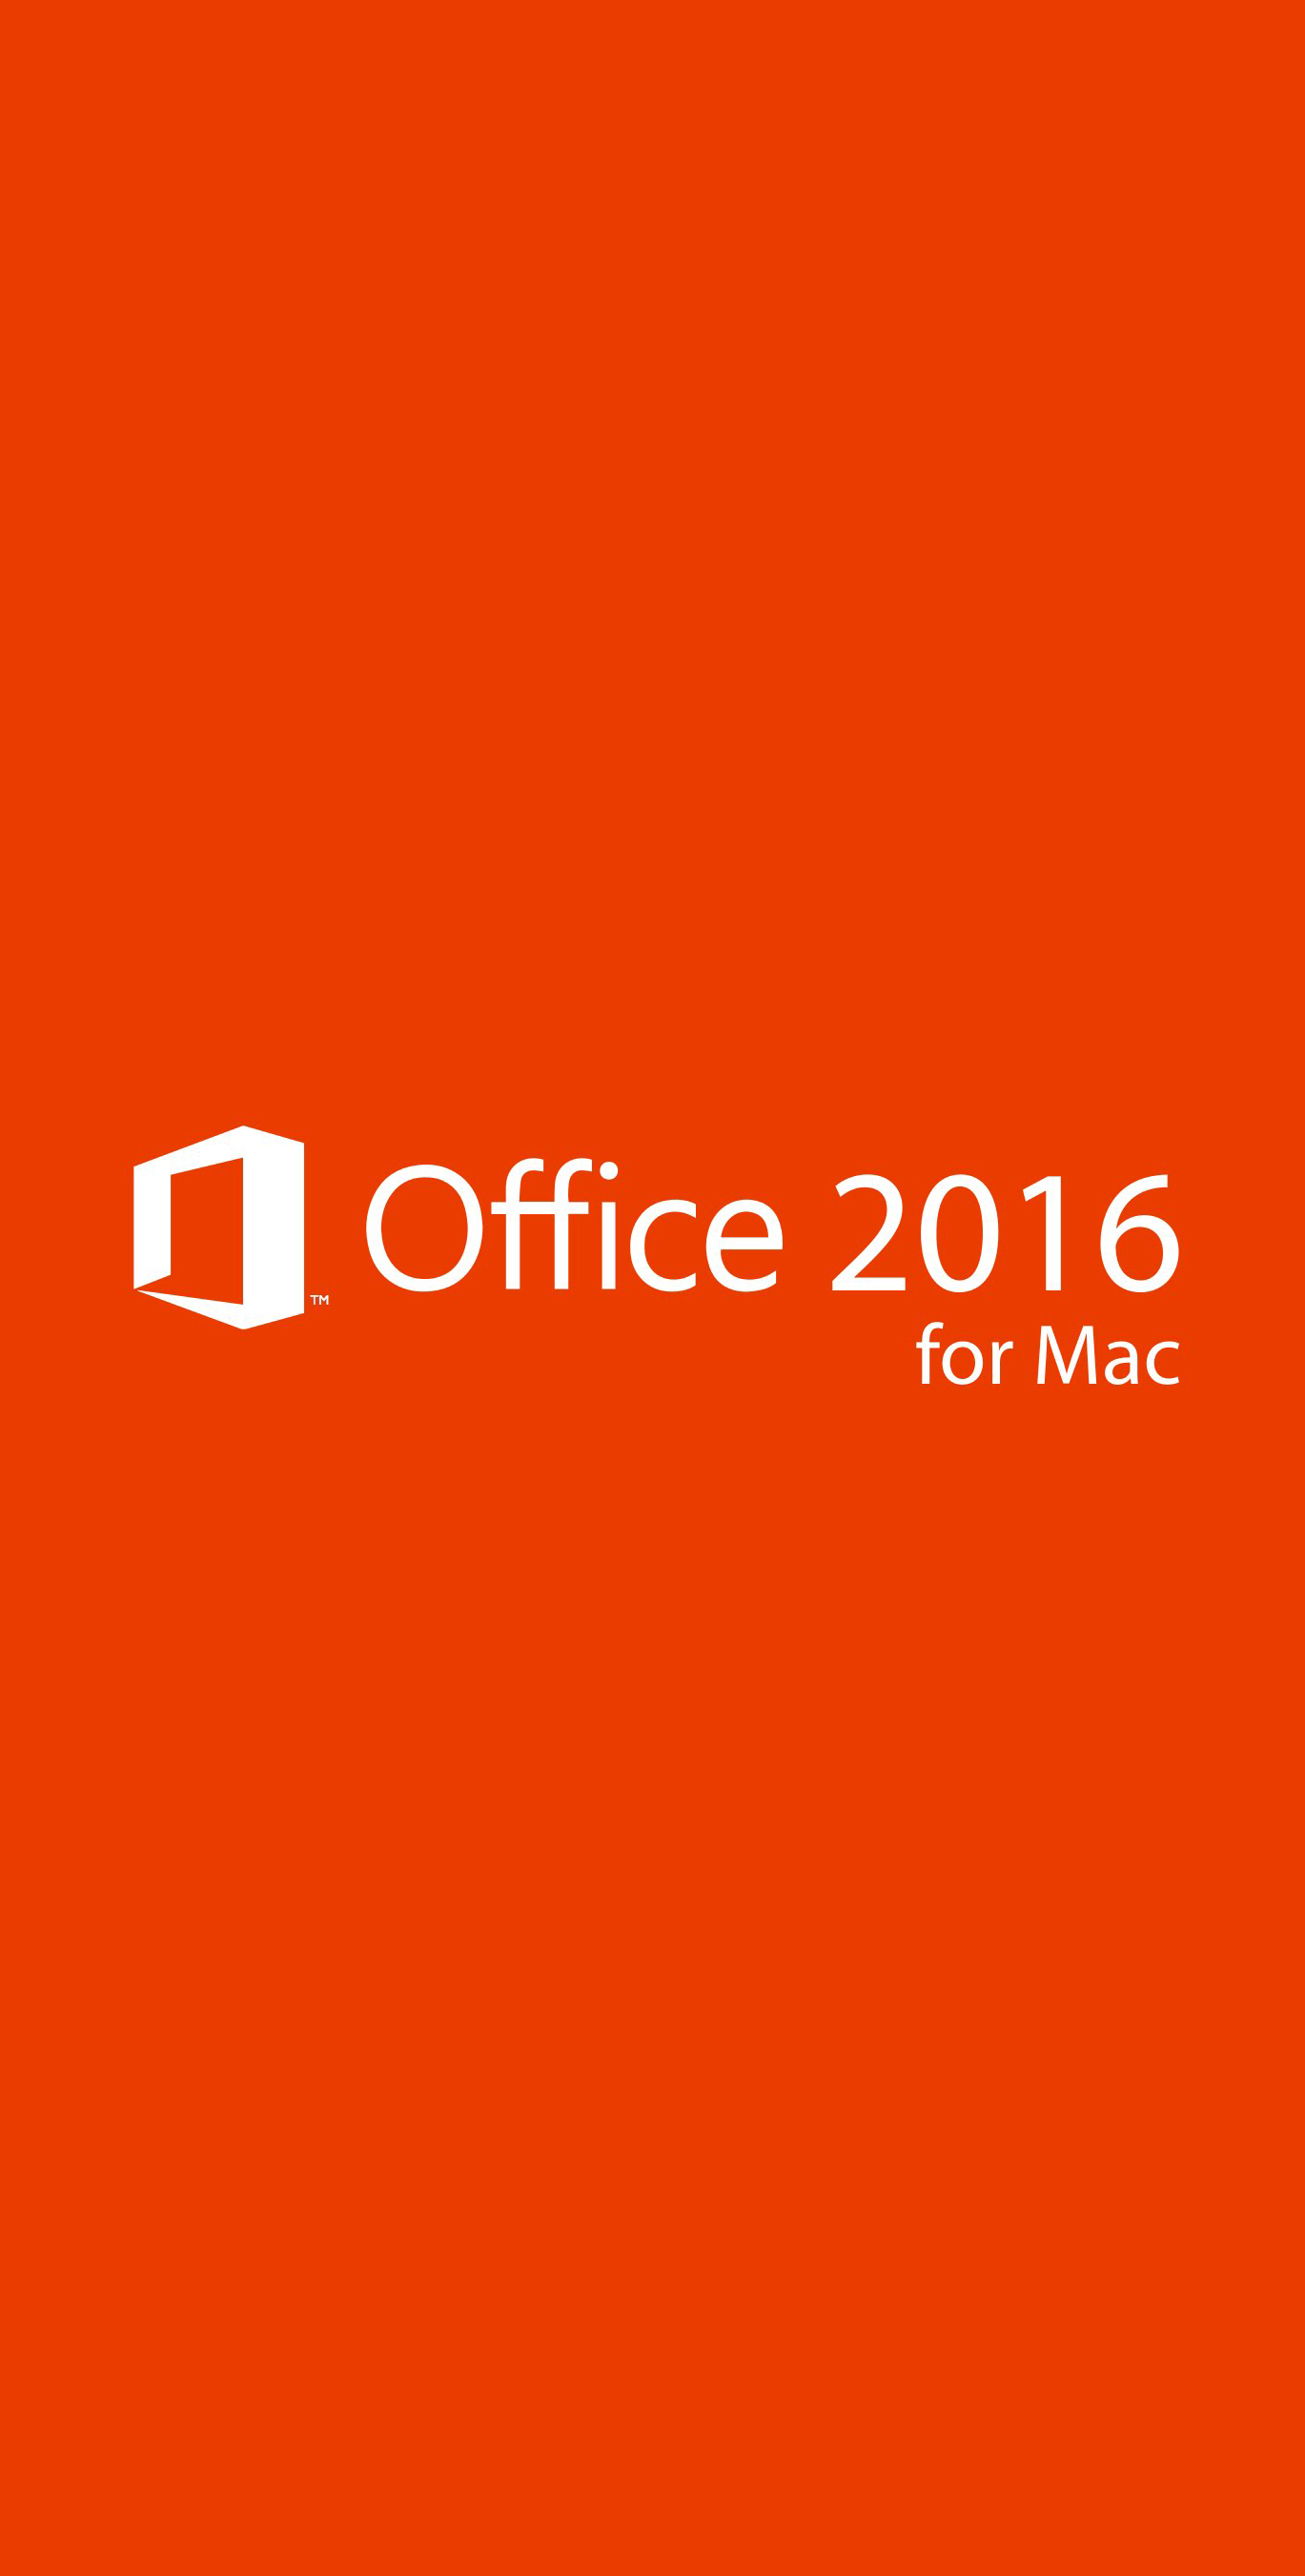 office 2016 for mac tpb